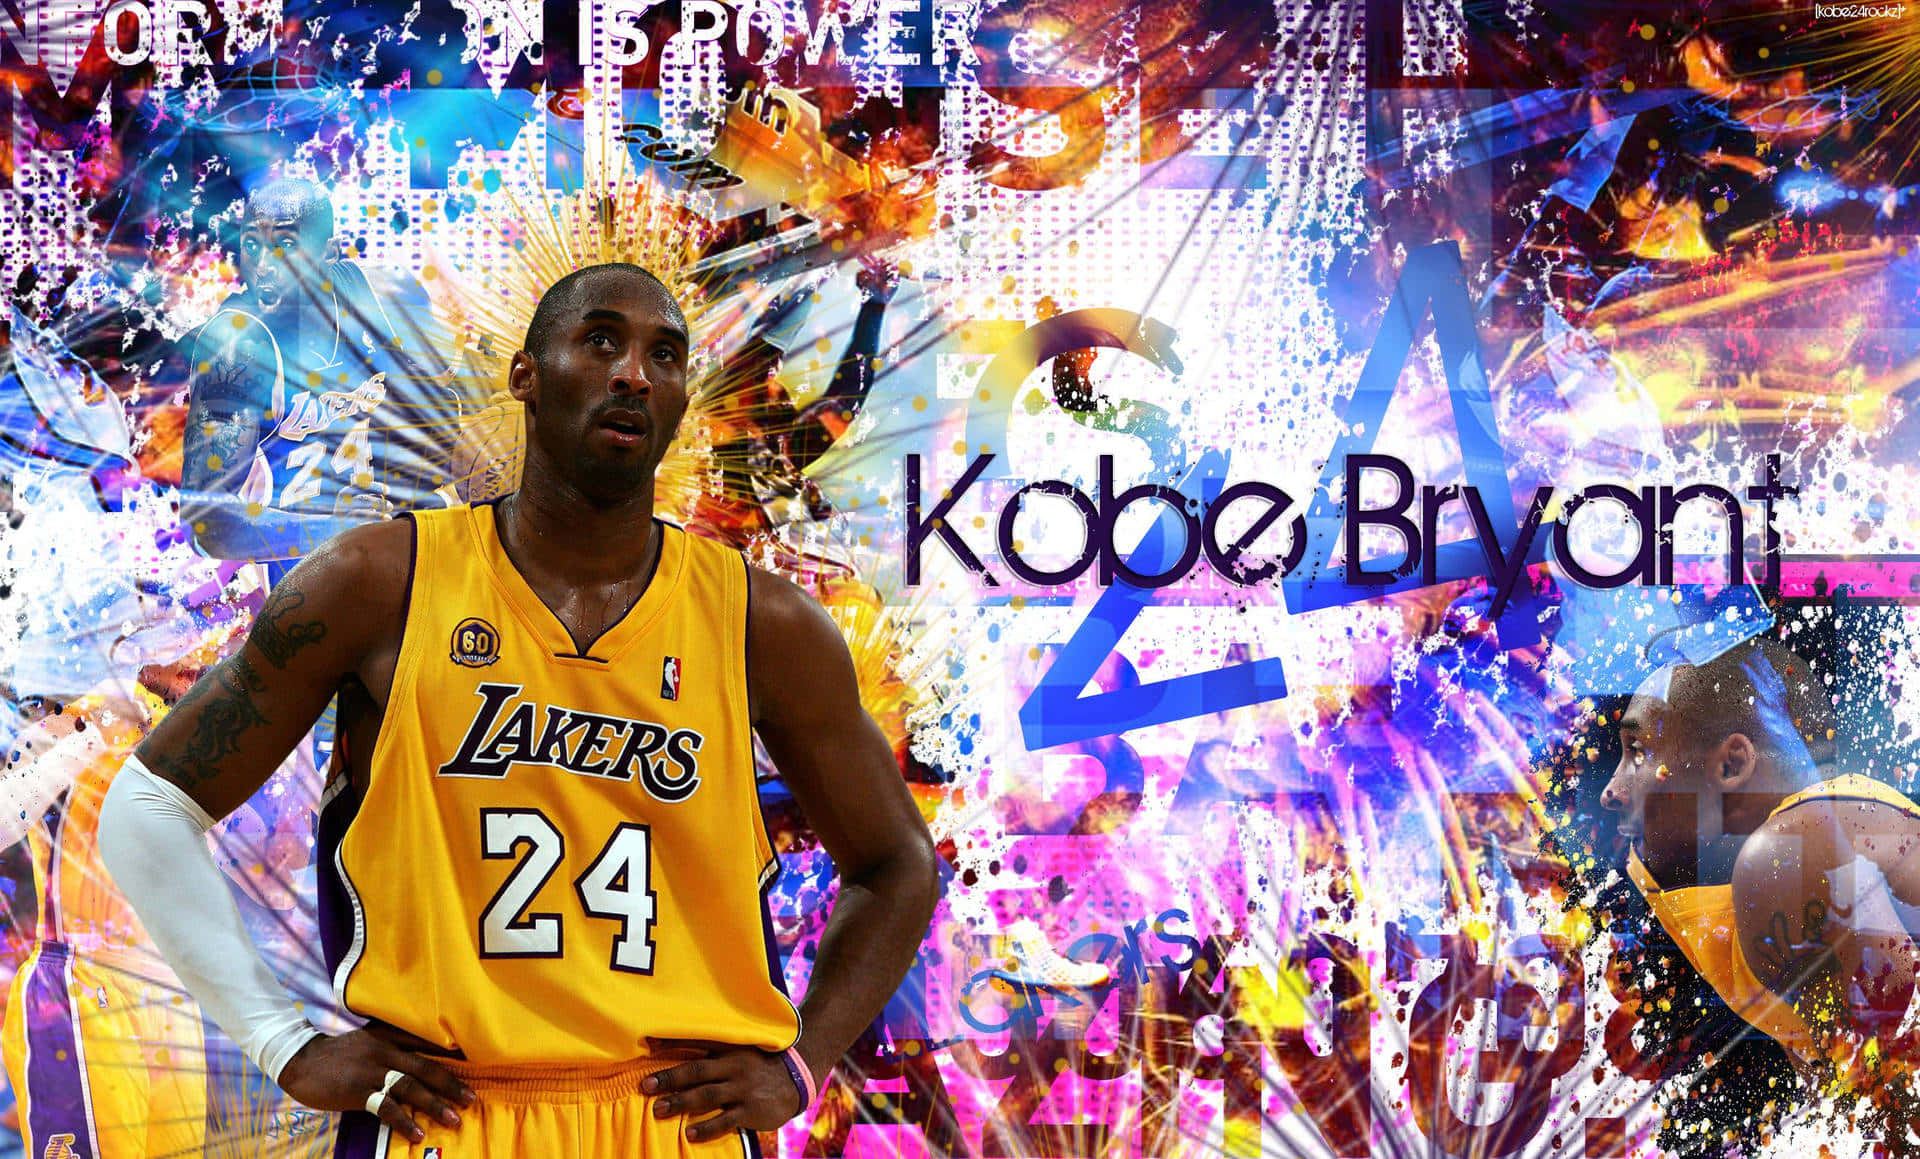 Kobe Bryant Inspires with His New Phone Wallpaper